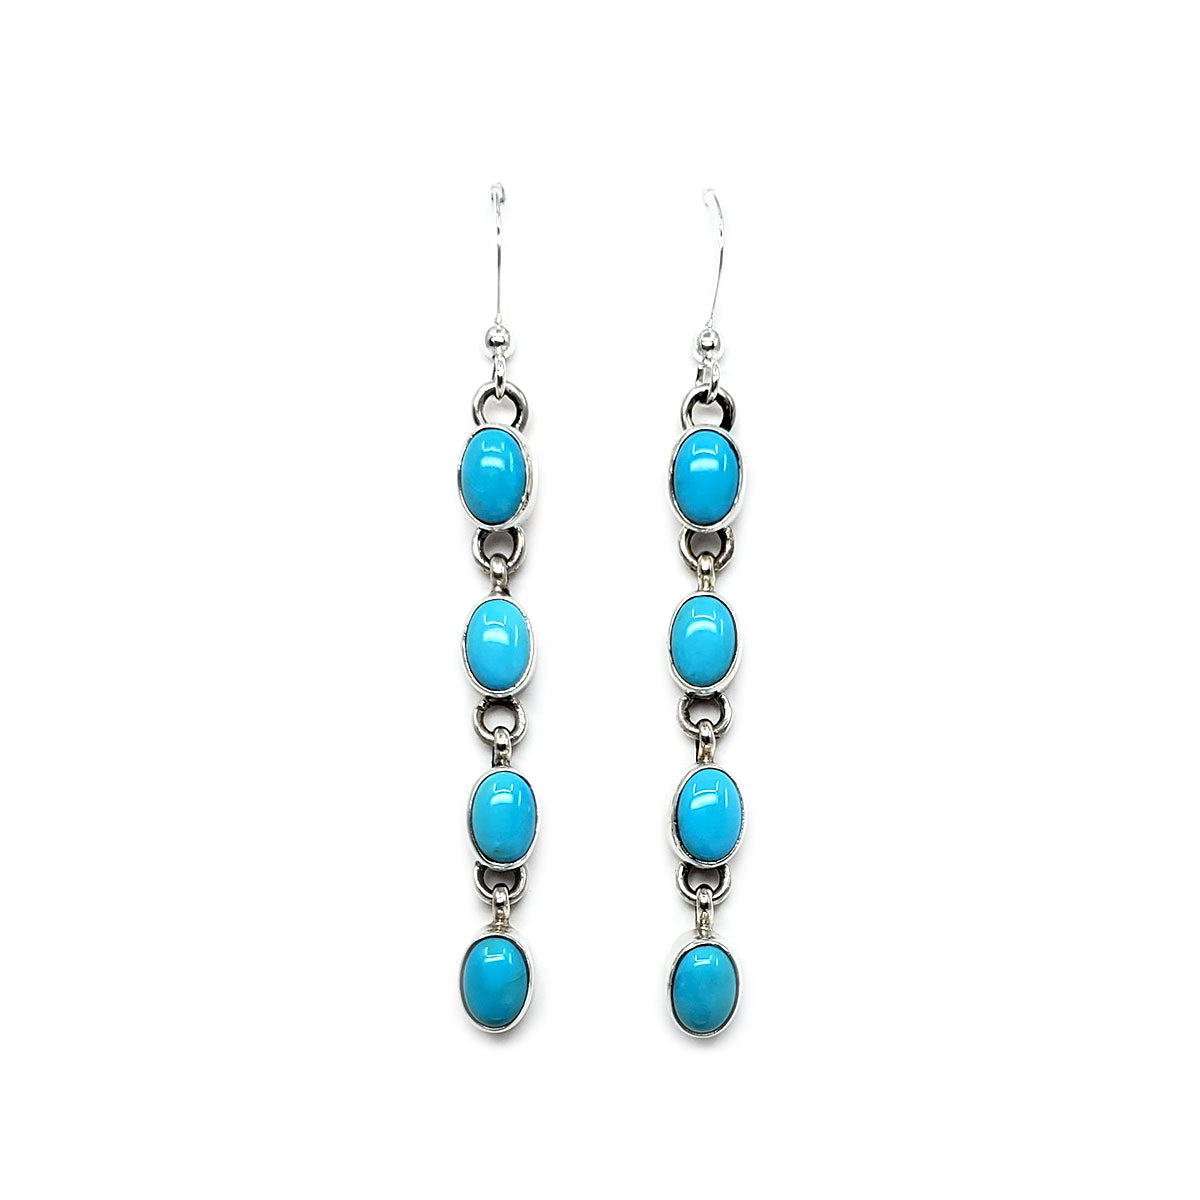 Rose S. Paxton: Turquoise 4 Stone Drop Earrings